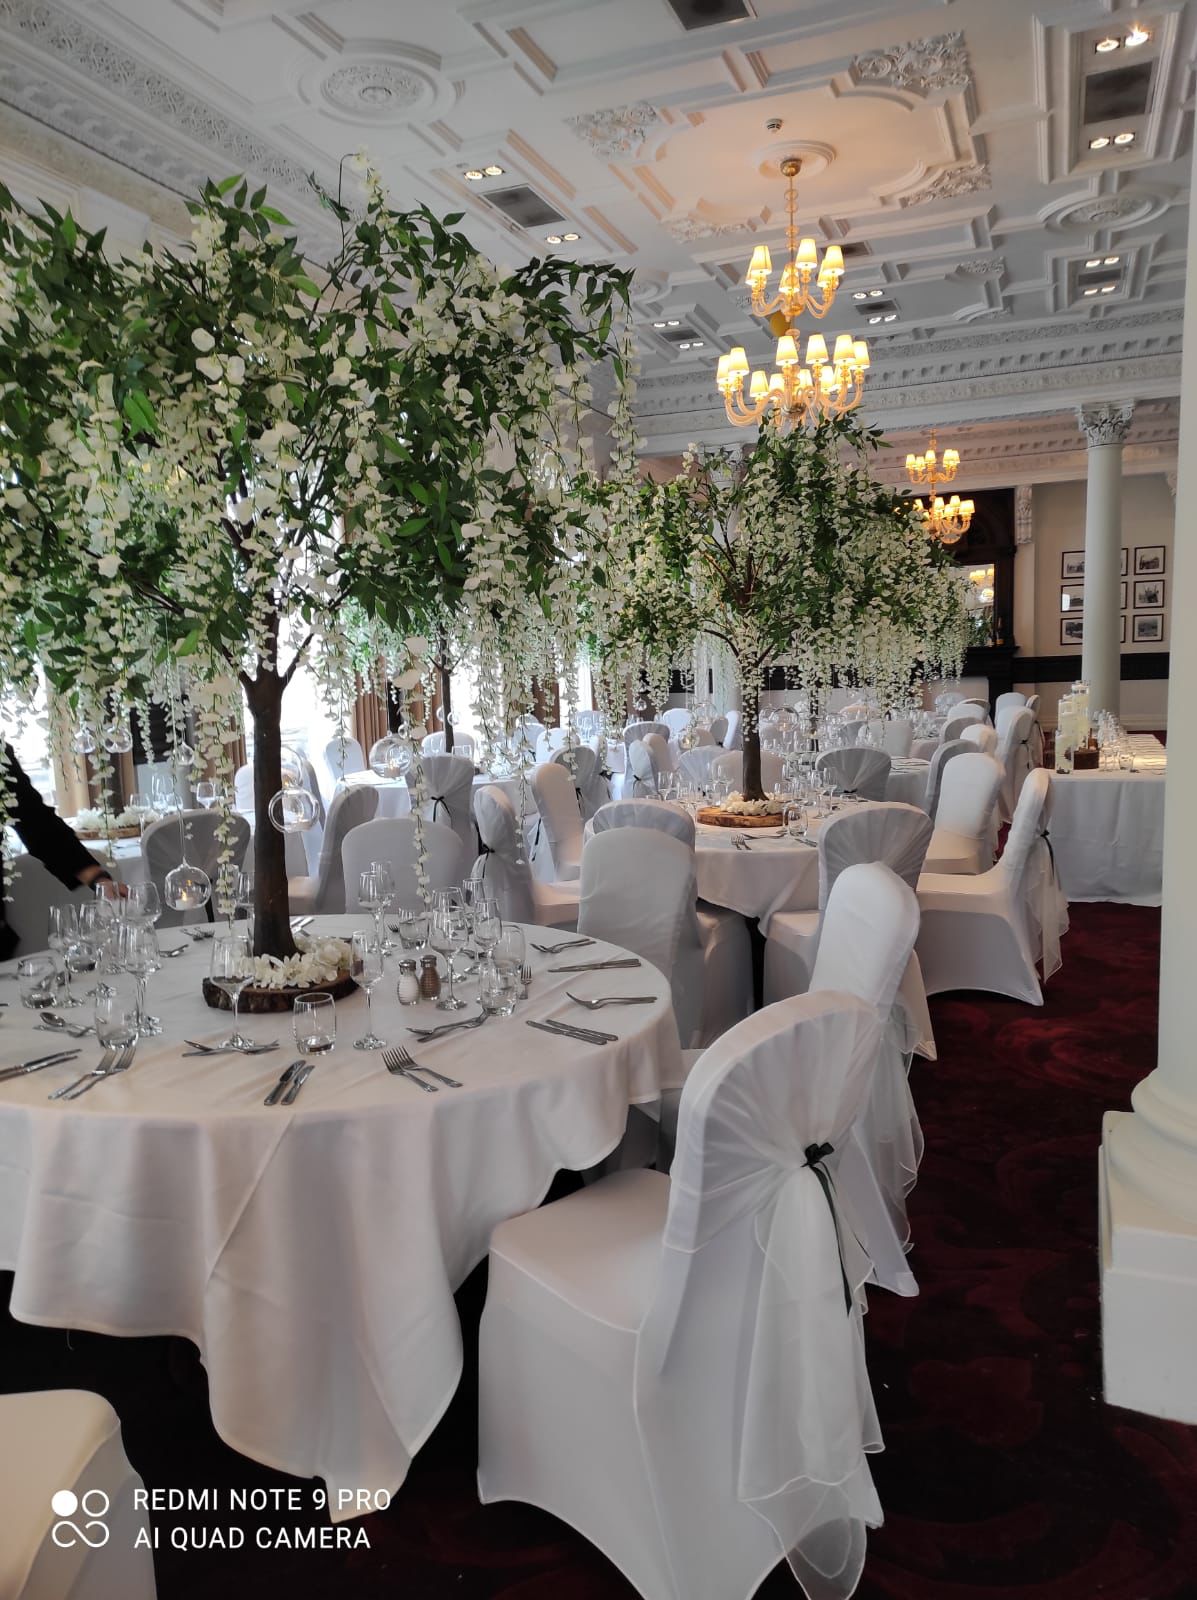 beautiful wedding venue dressing small trees sat atop tables for centrepieces.